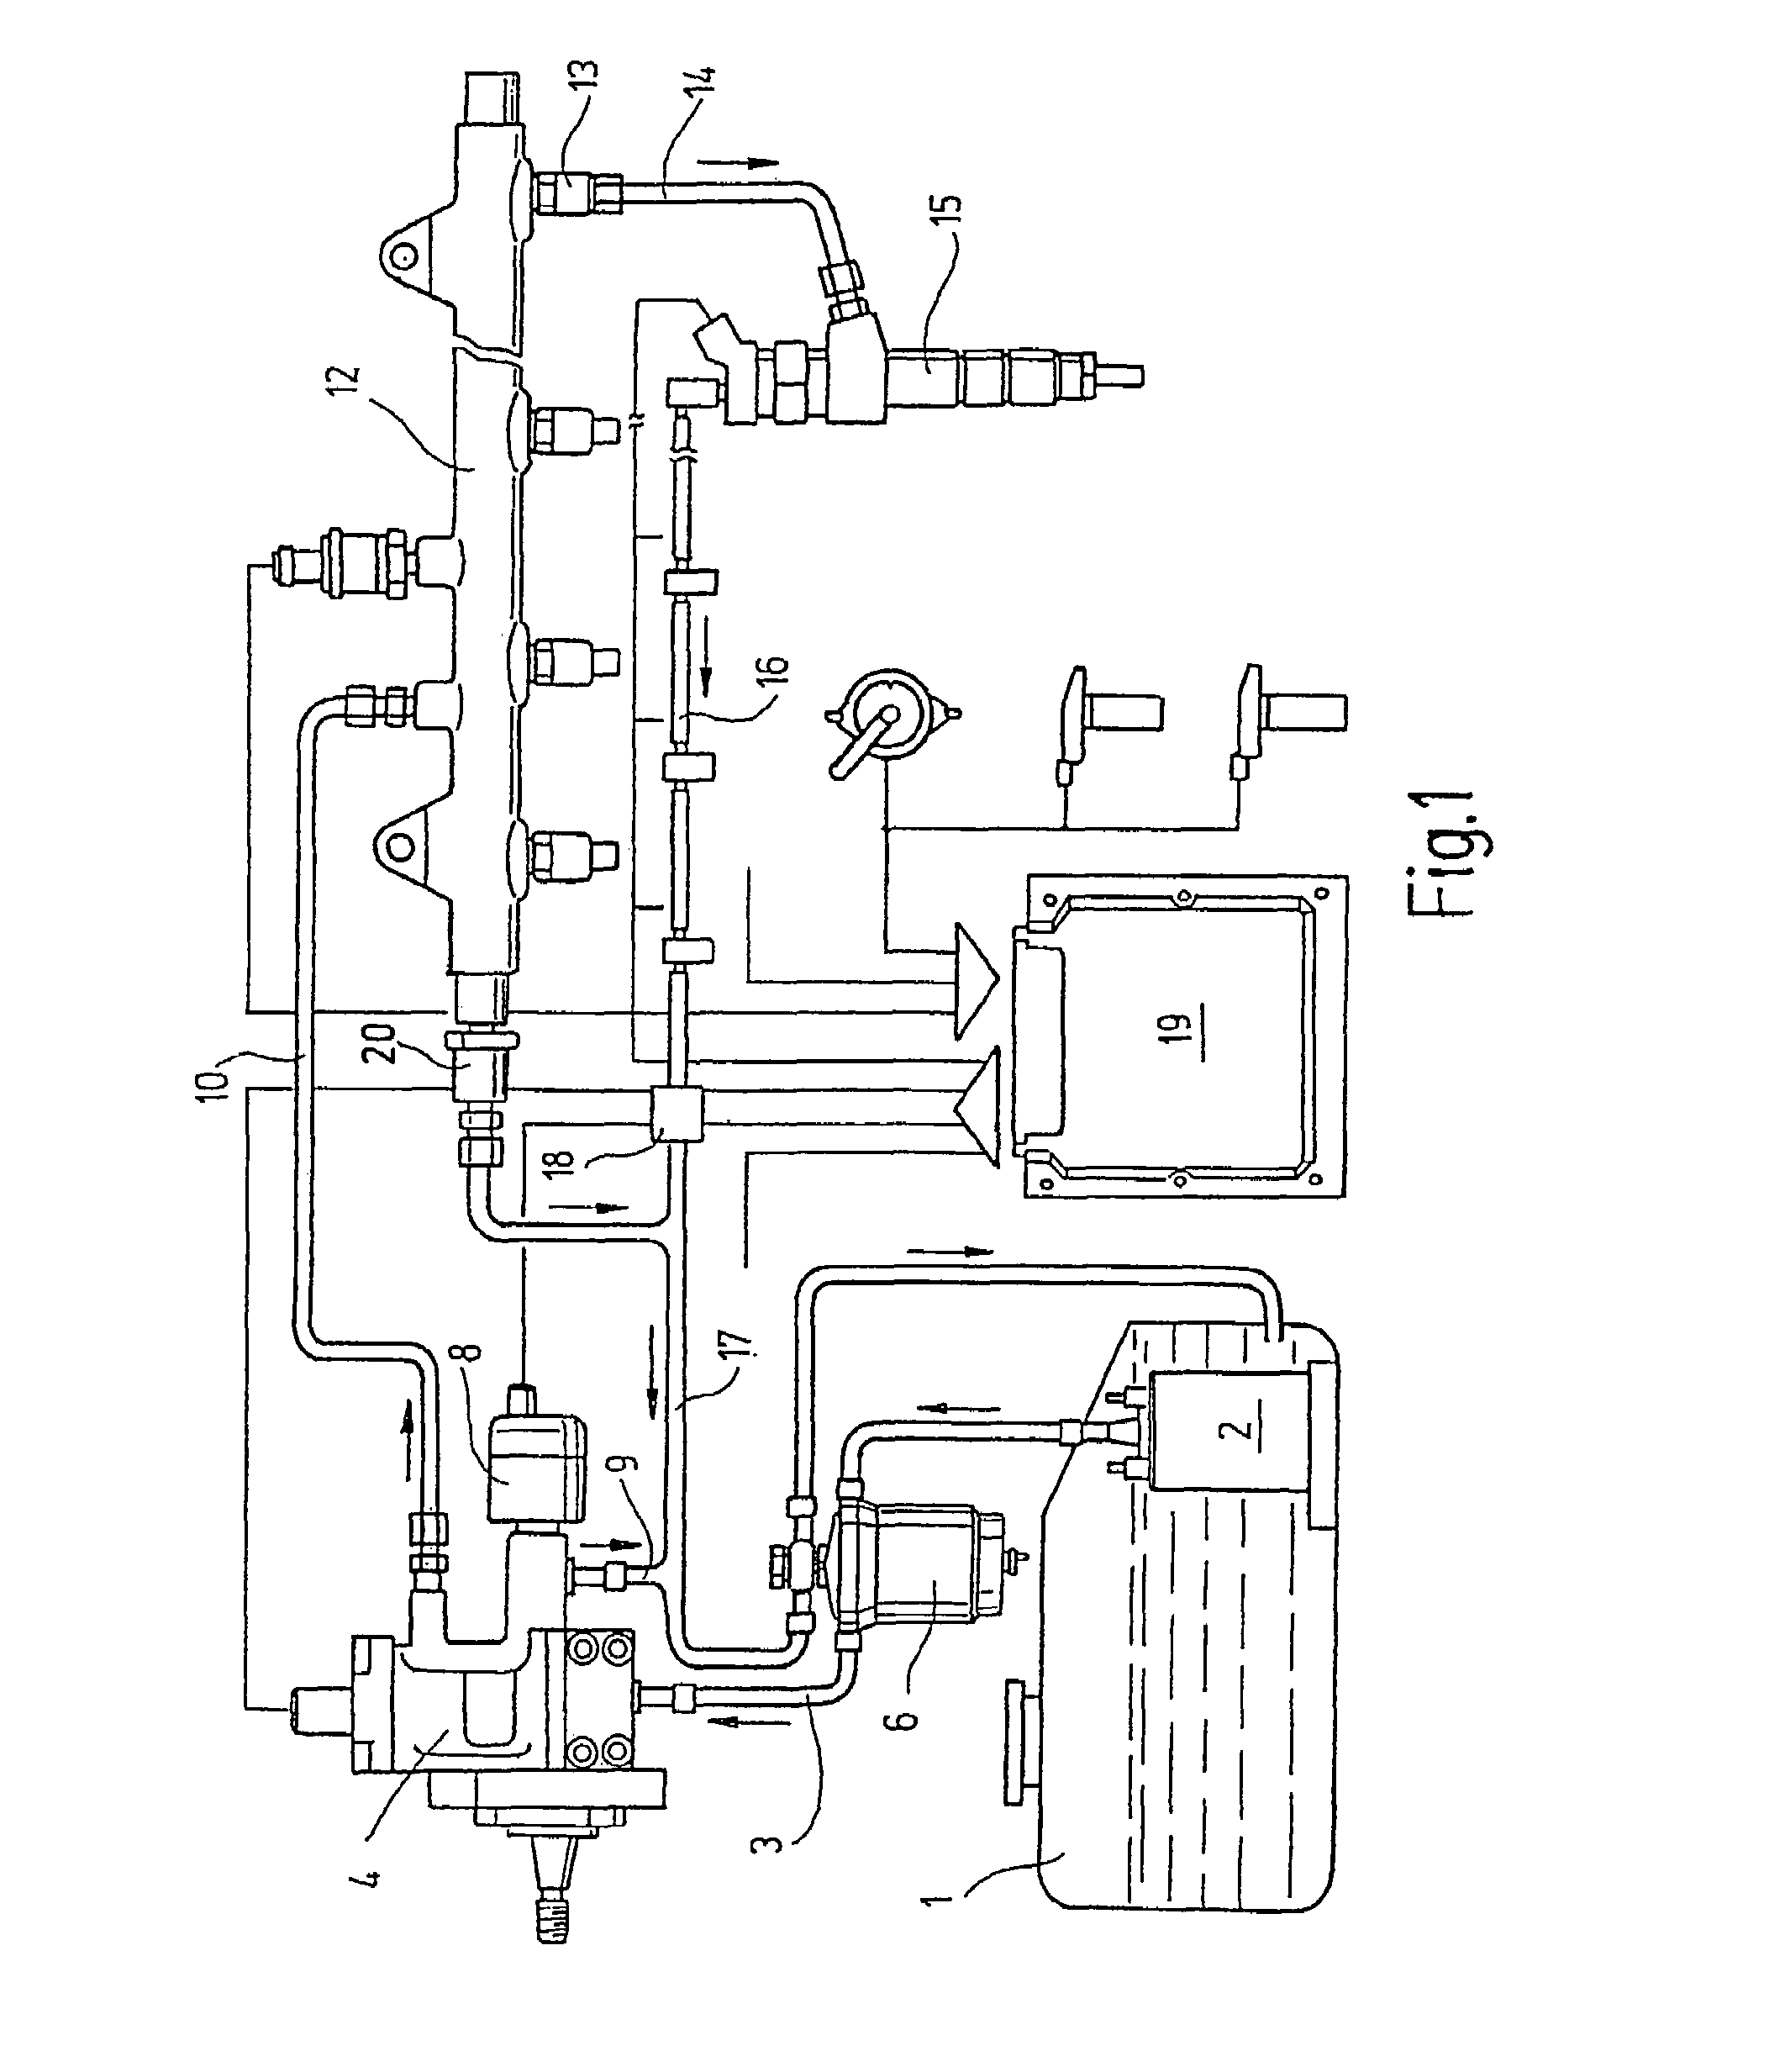 Fuel injection system